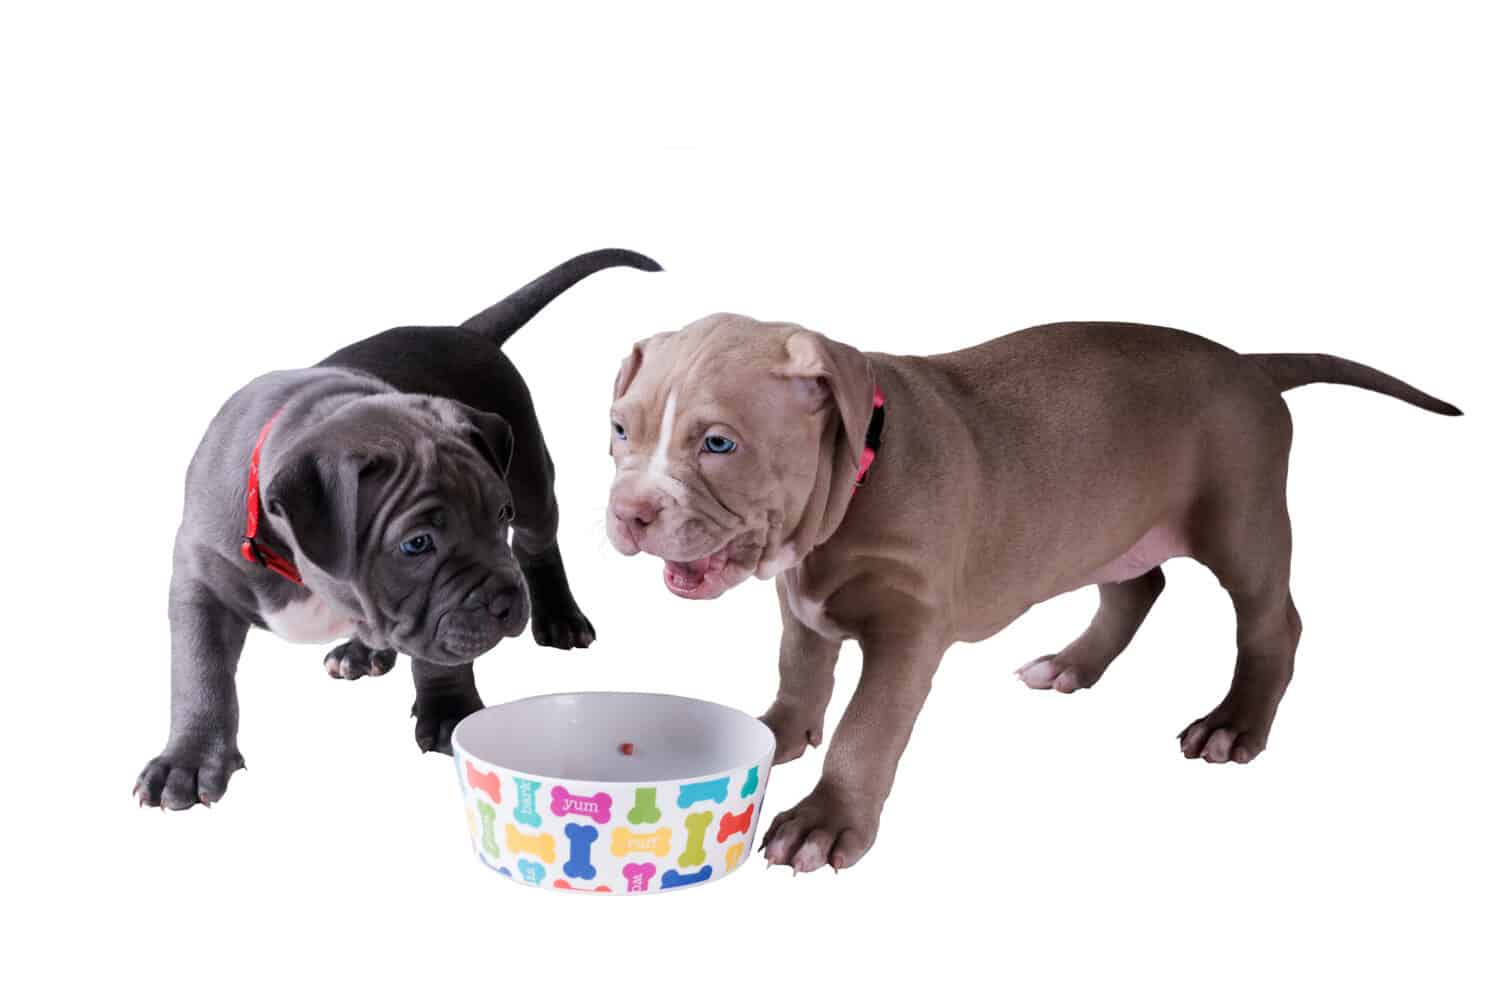 Two pit bull puppies near an empty bowl for eating. Isolated on white background